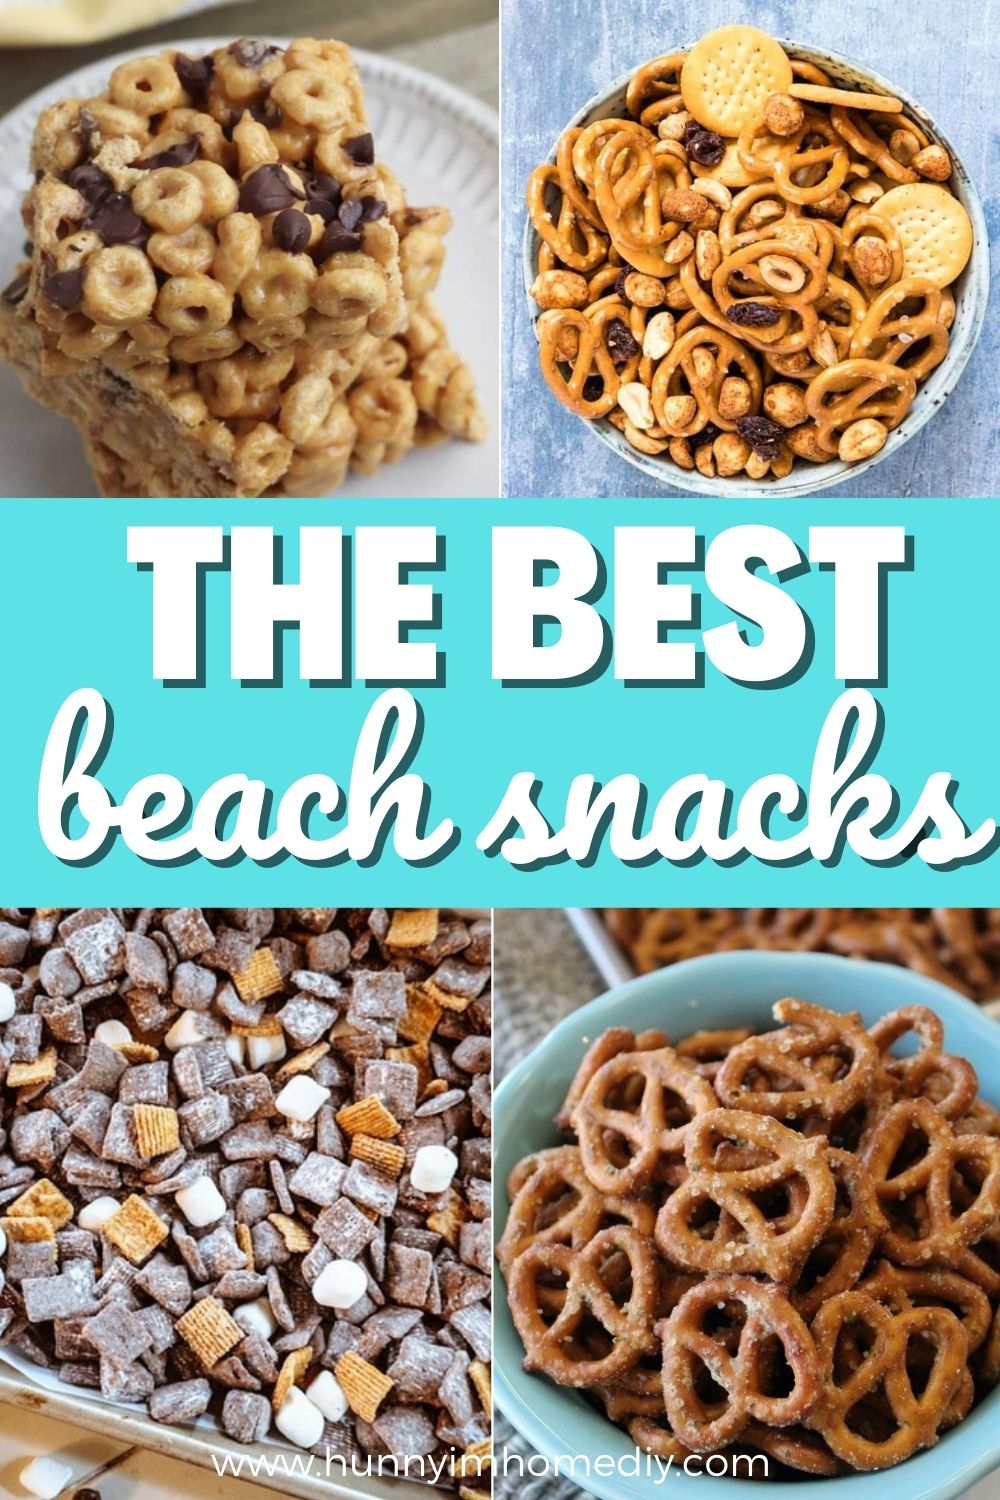 38 Quick & Easy Beach Snacks to Enjoy on the Sand with Your Family